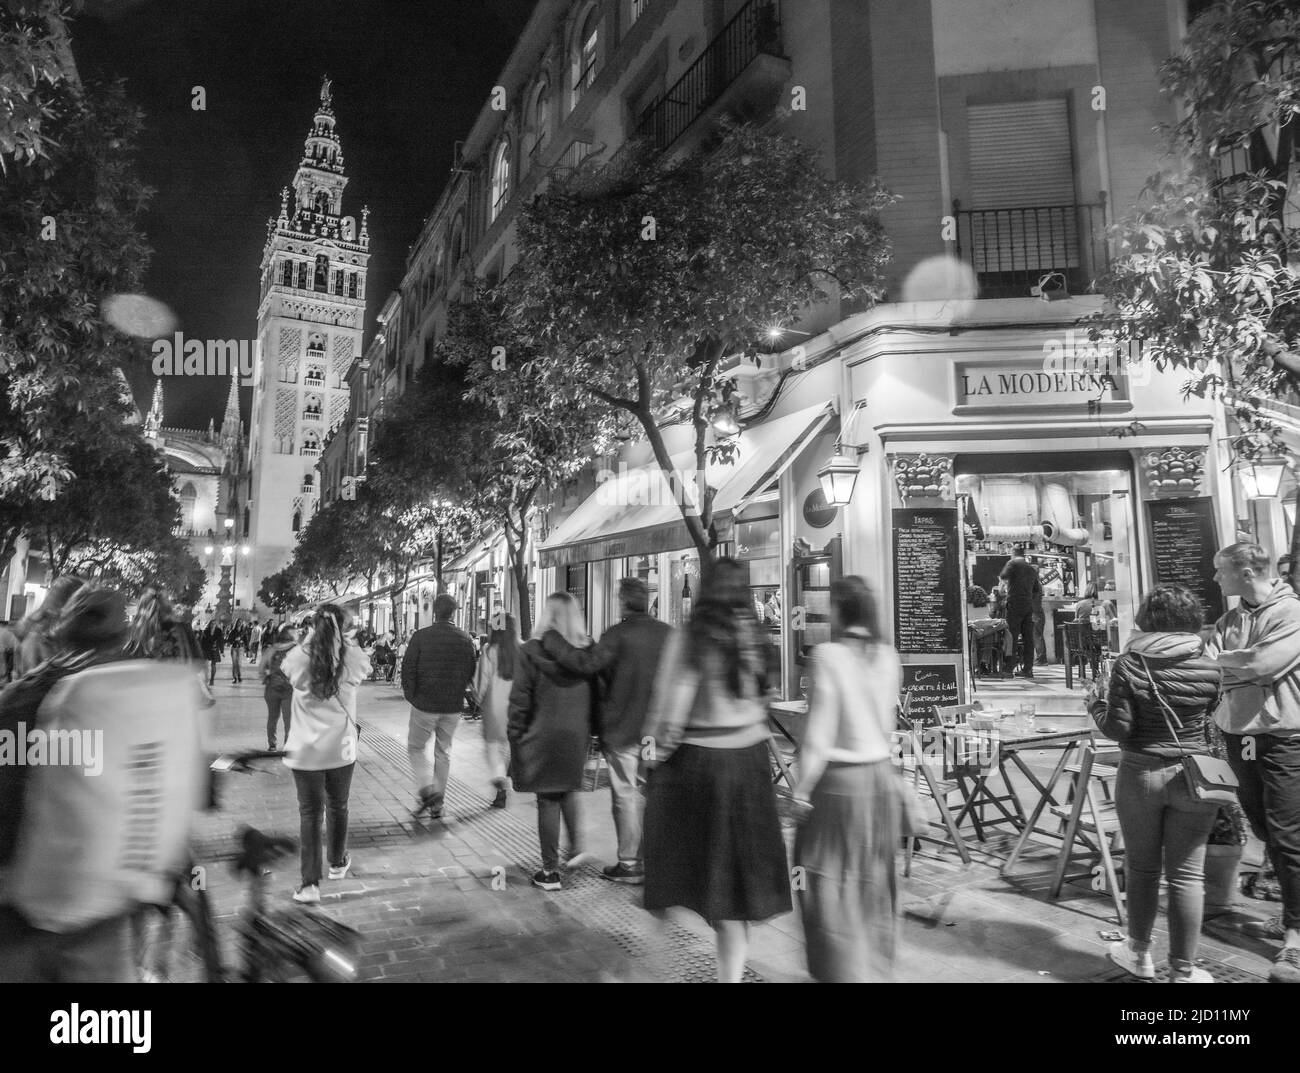 People enjoying a night out Seville, Spain Stock Photo